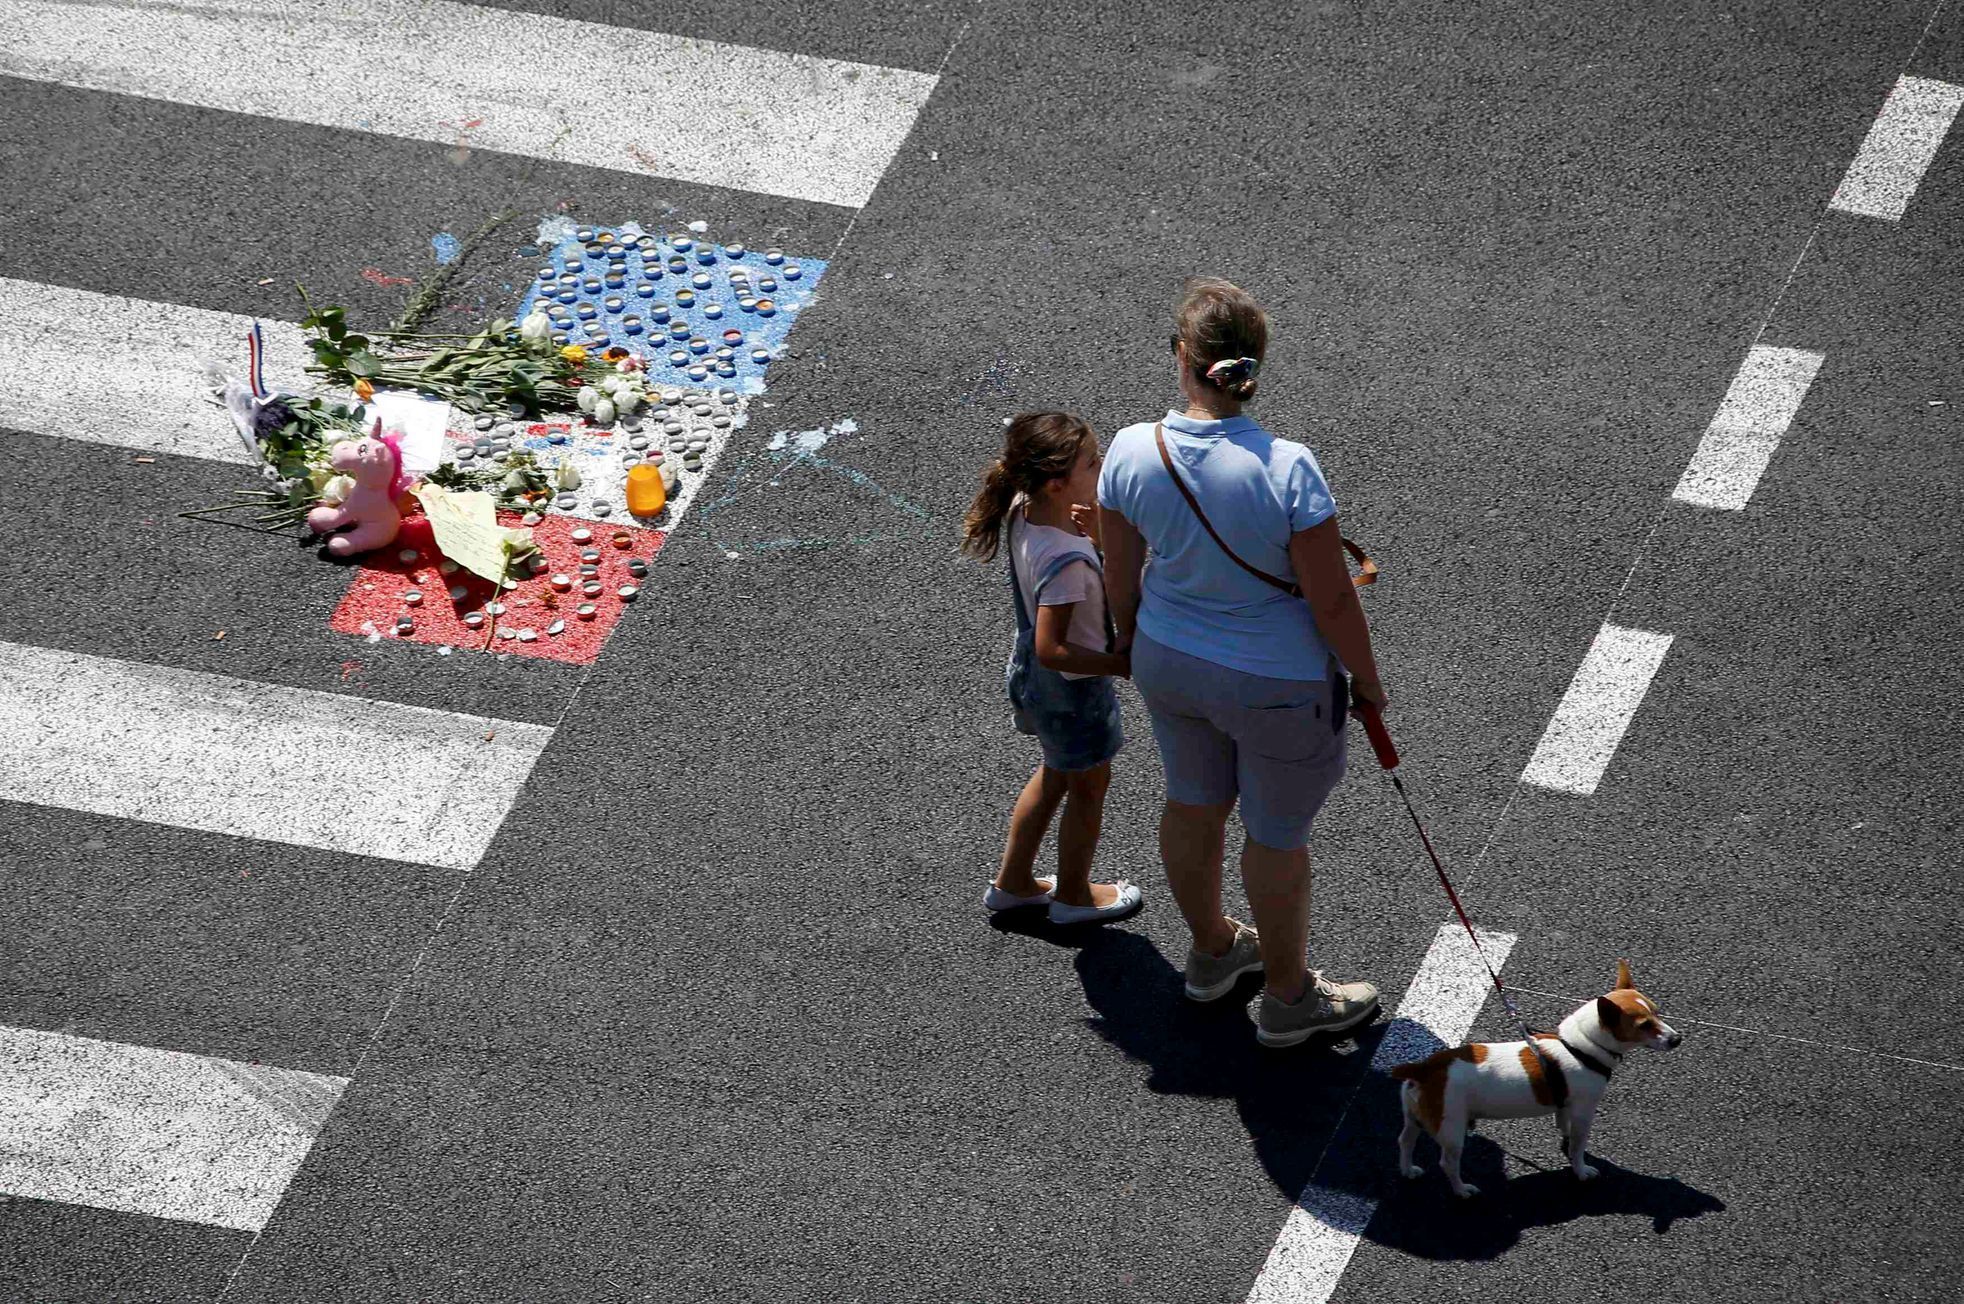 A makeshift memorial placed on the road during a minute of silence in Nice